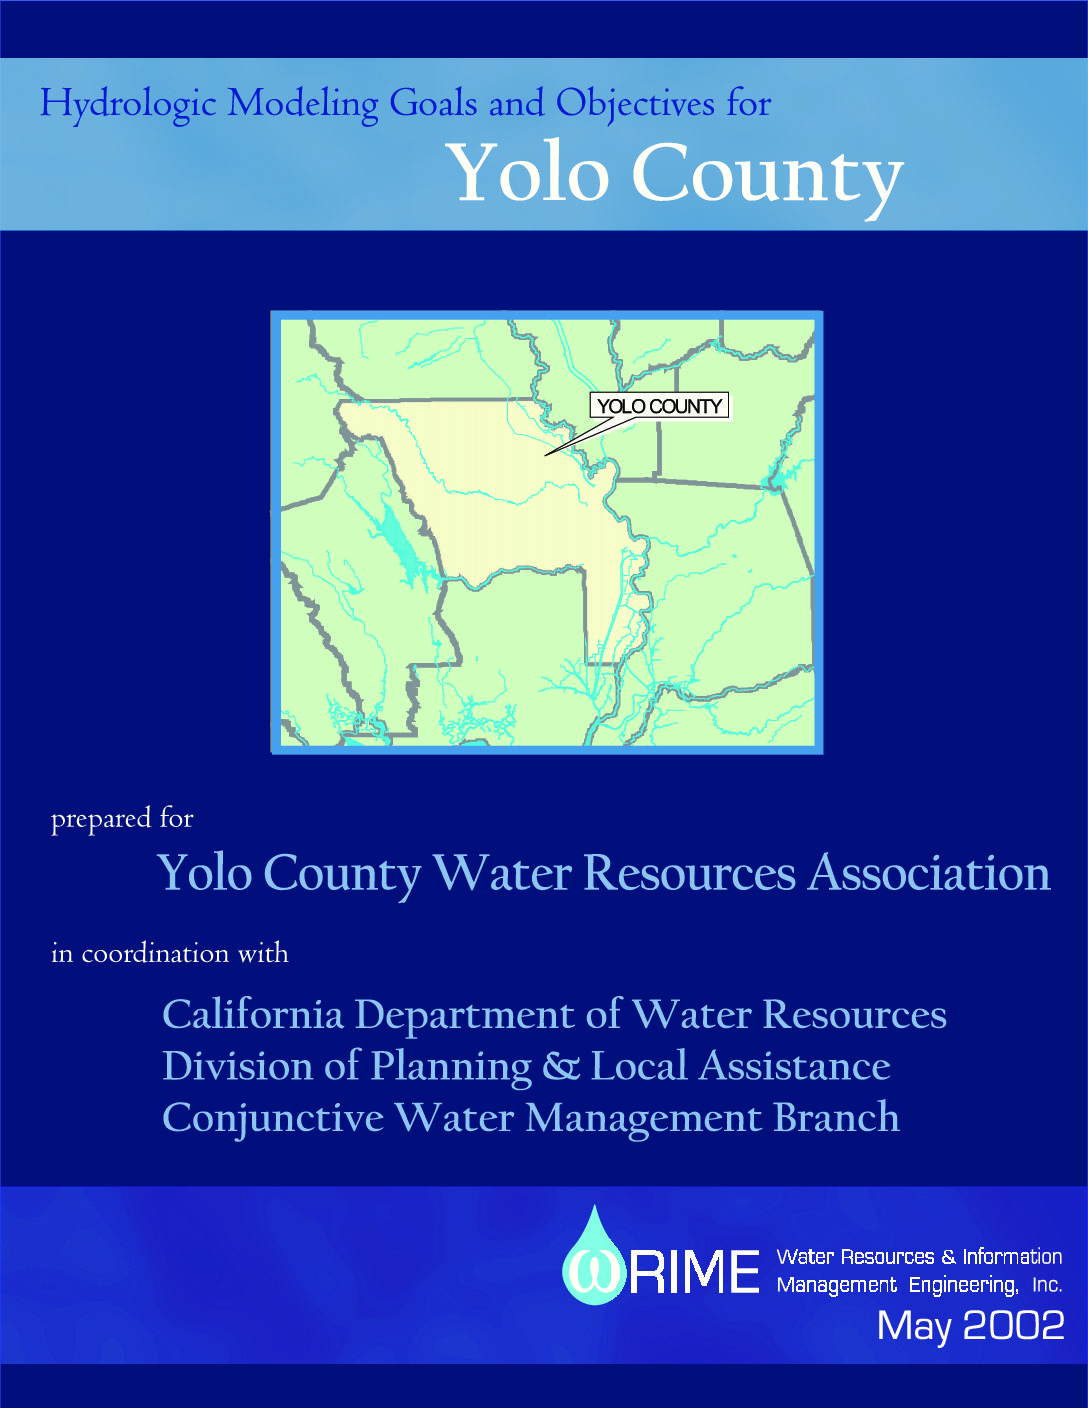 Hydrologic Modeling Goals and Objectives for Yolo County